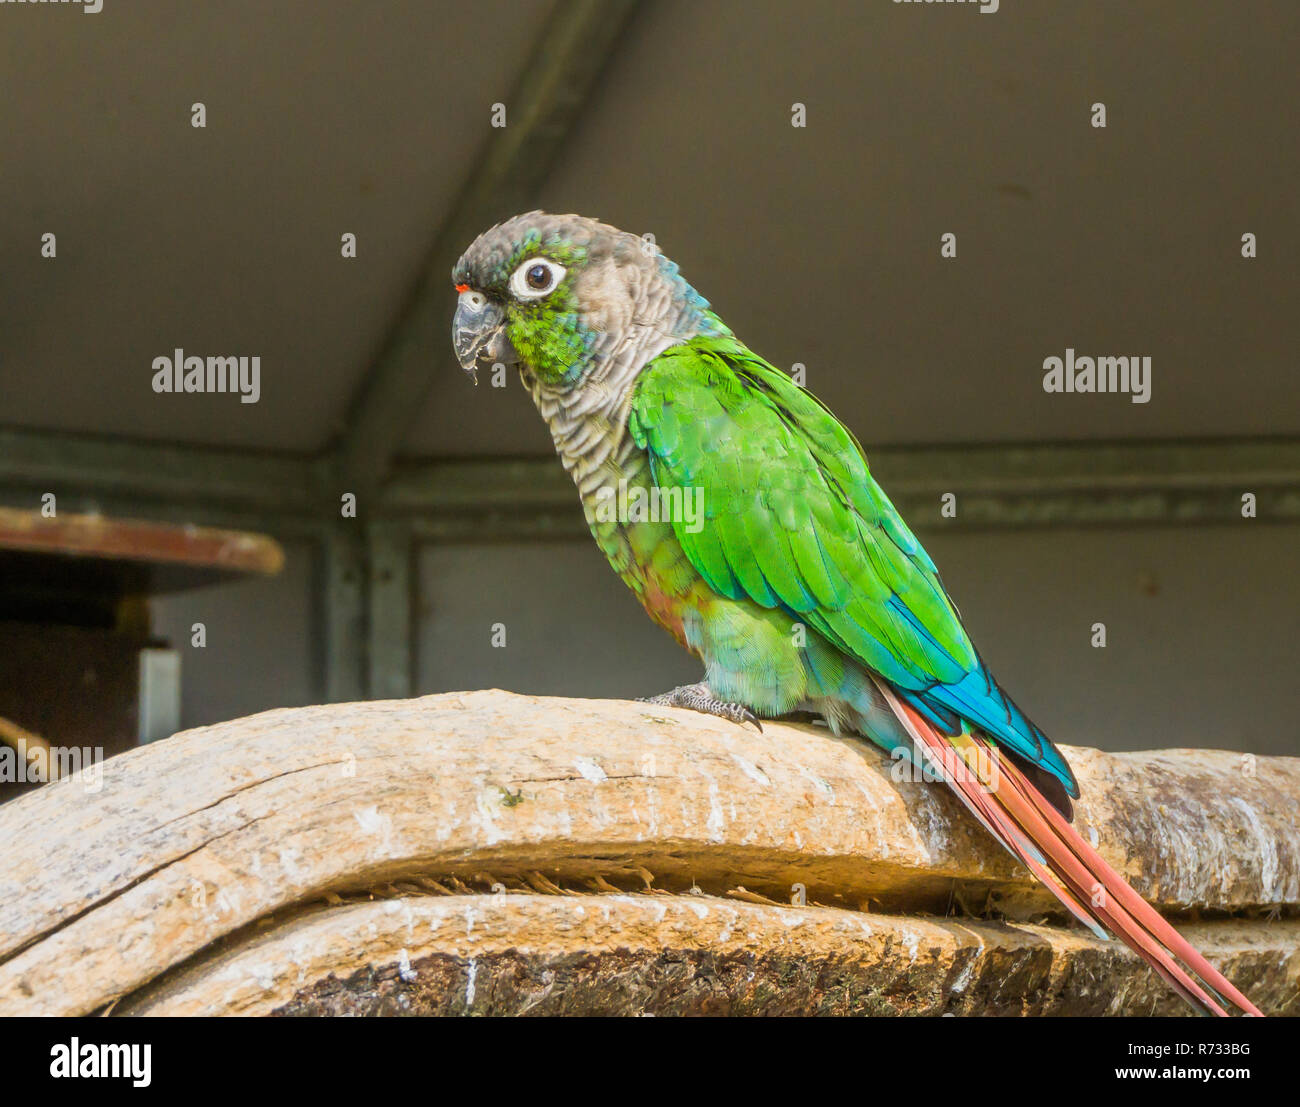 green cheeked parakeet from a side view, a tropical and colorful pet from brazil Stock Photo